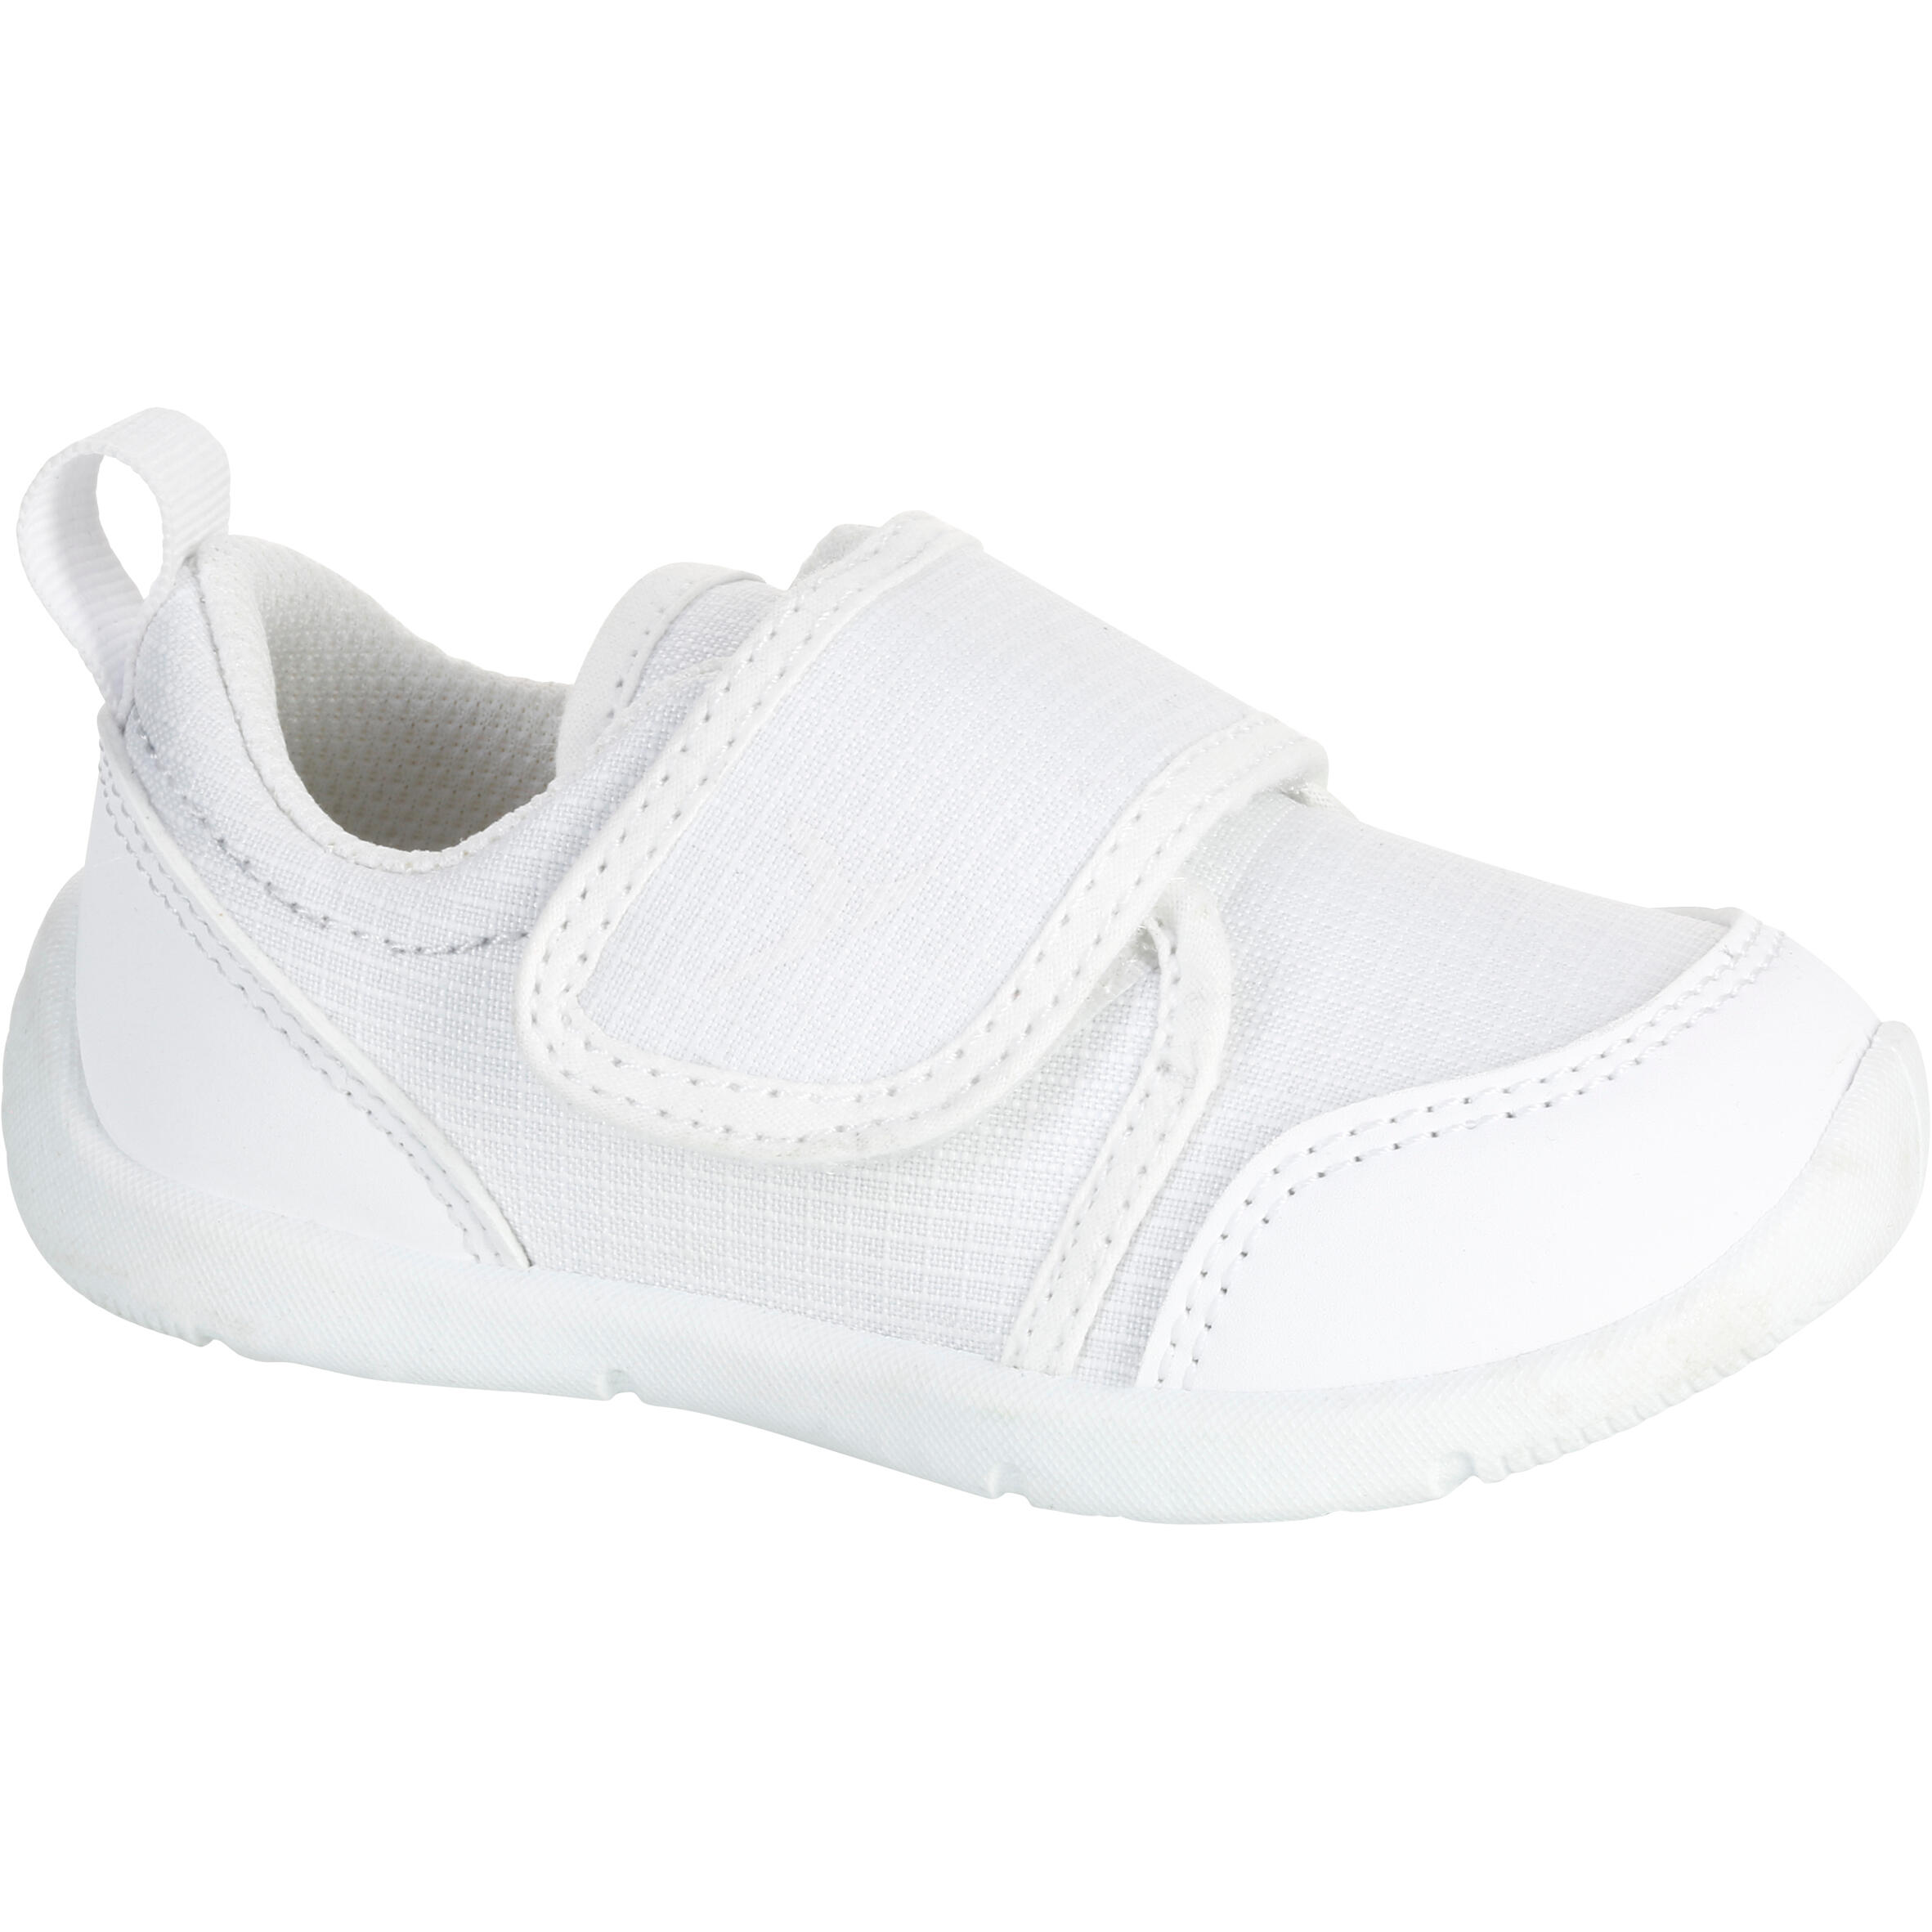 100 I Learn First Gym Shoes - White 